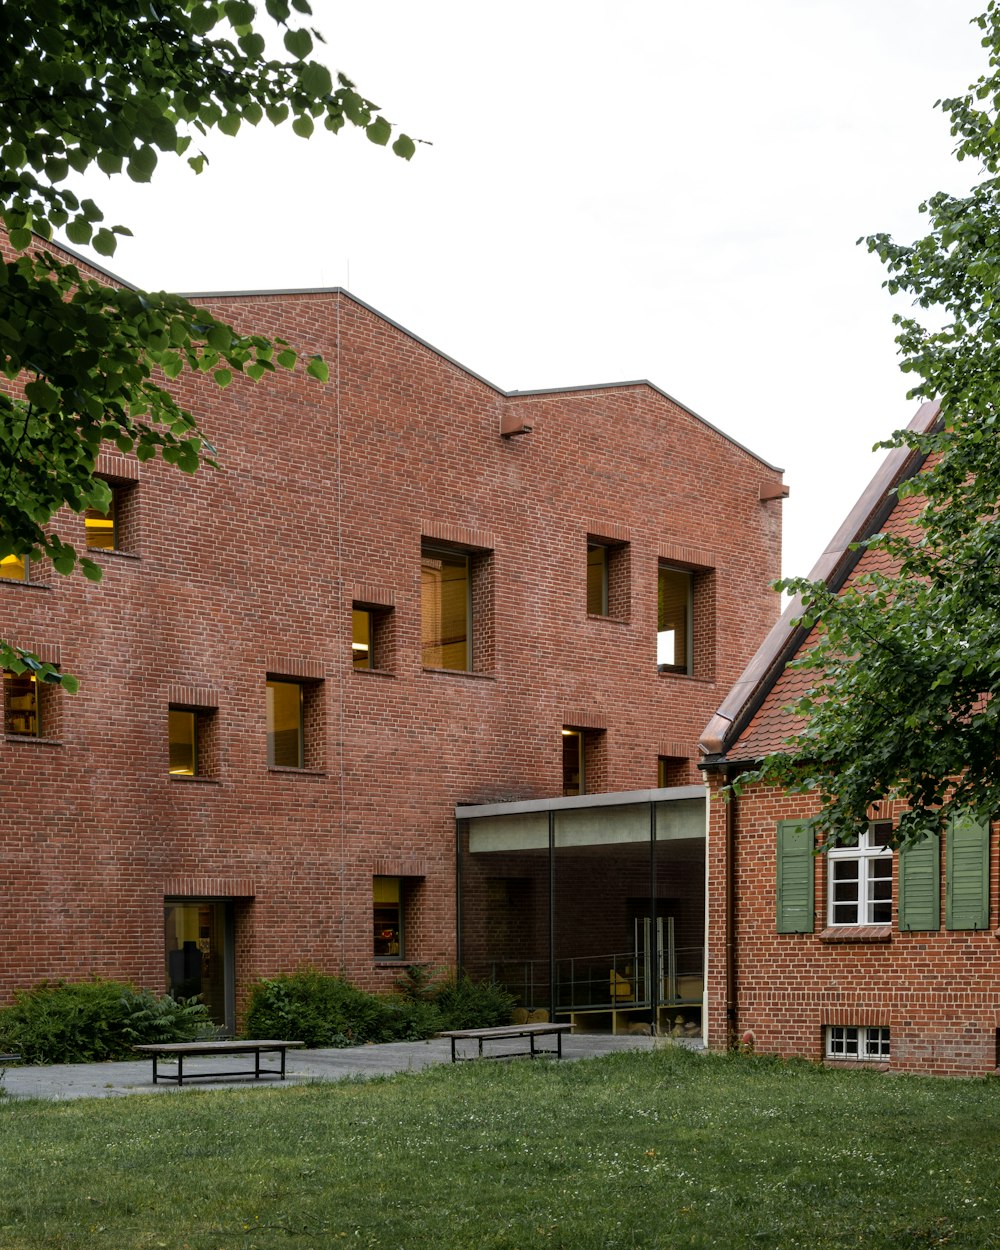 a brick building with a green lawn